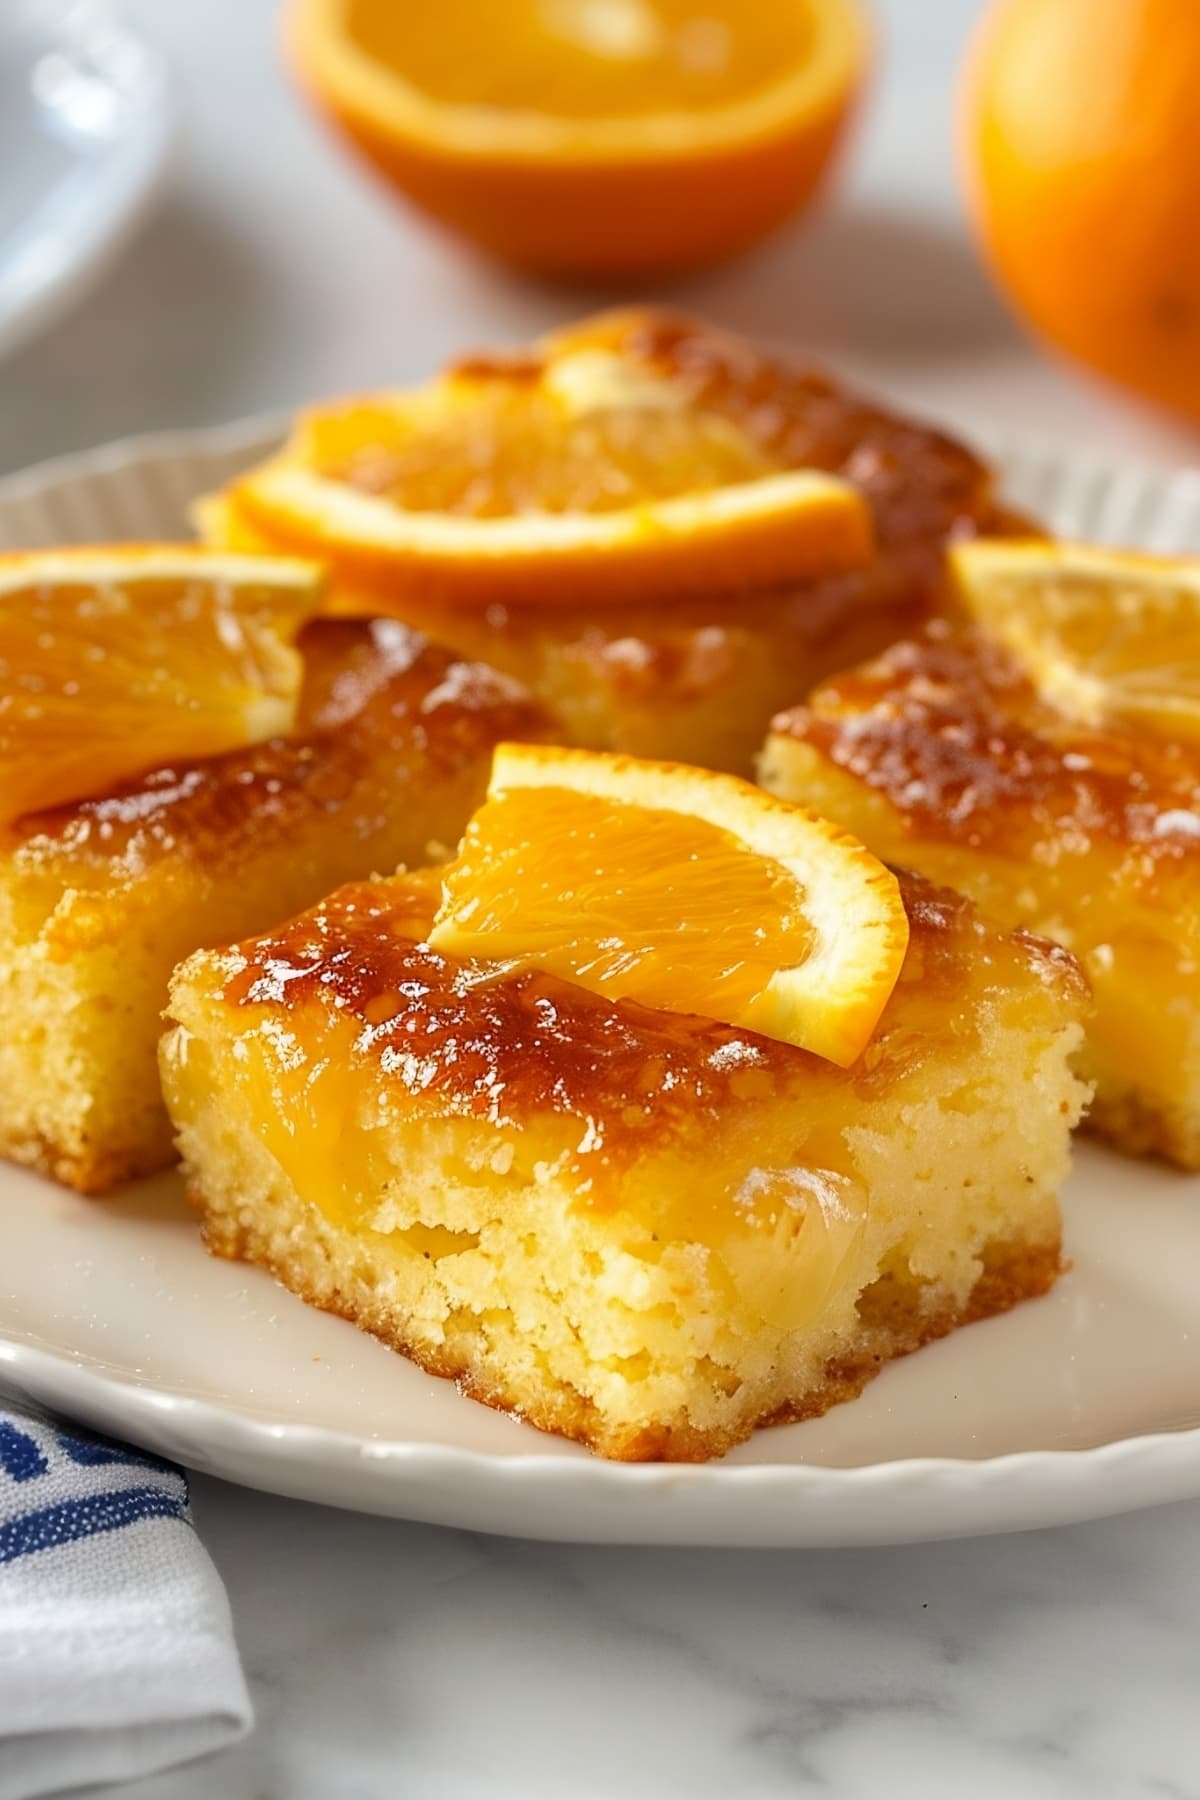 Homemade Greek orange cake with phyllo dough, bursting with tangy citrus flavor and hints of sweetness